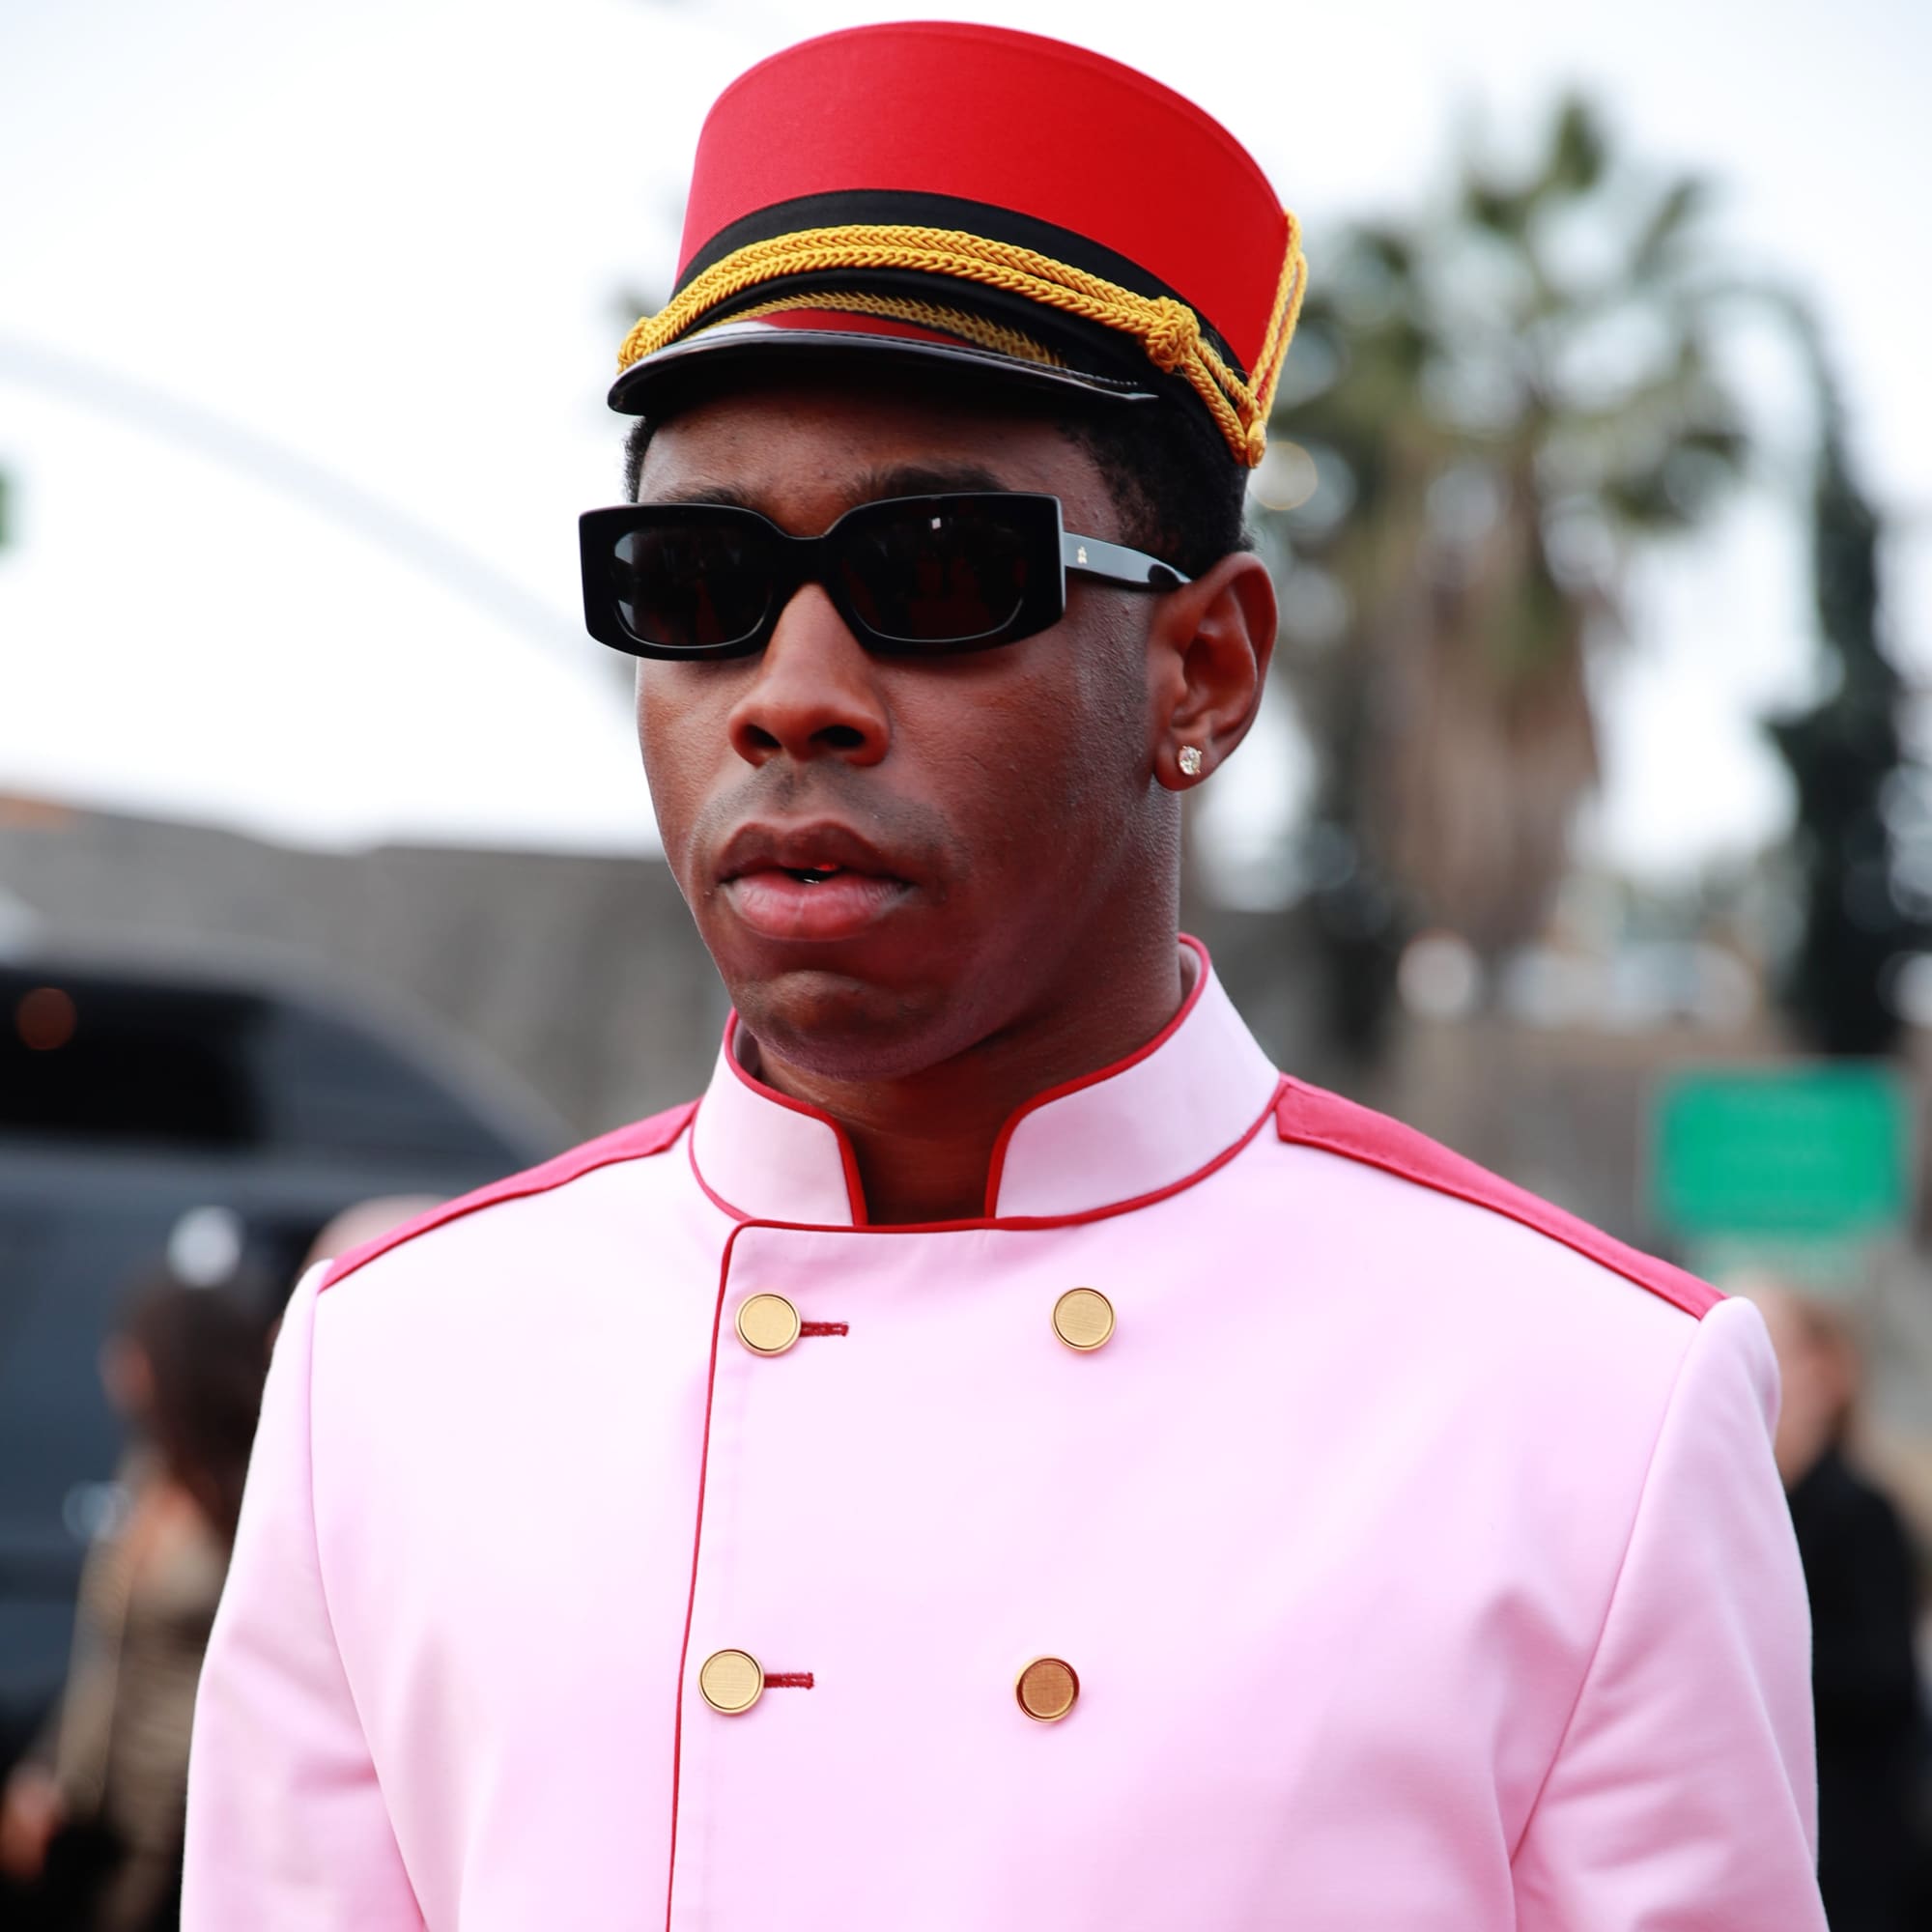 A neckerchief will elevate your drab outfit. Just ask Tyler, The Creator